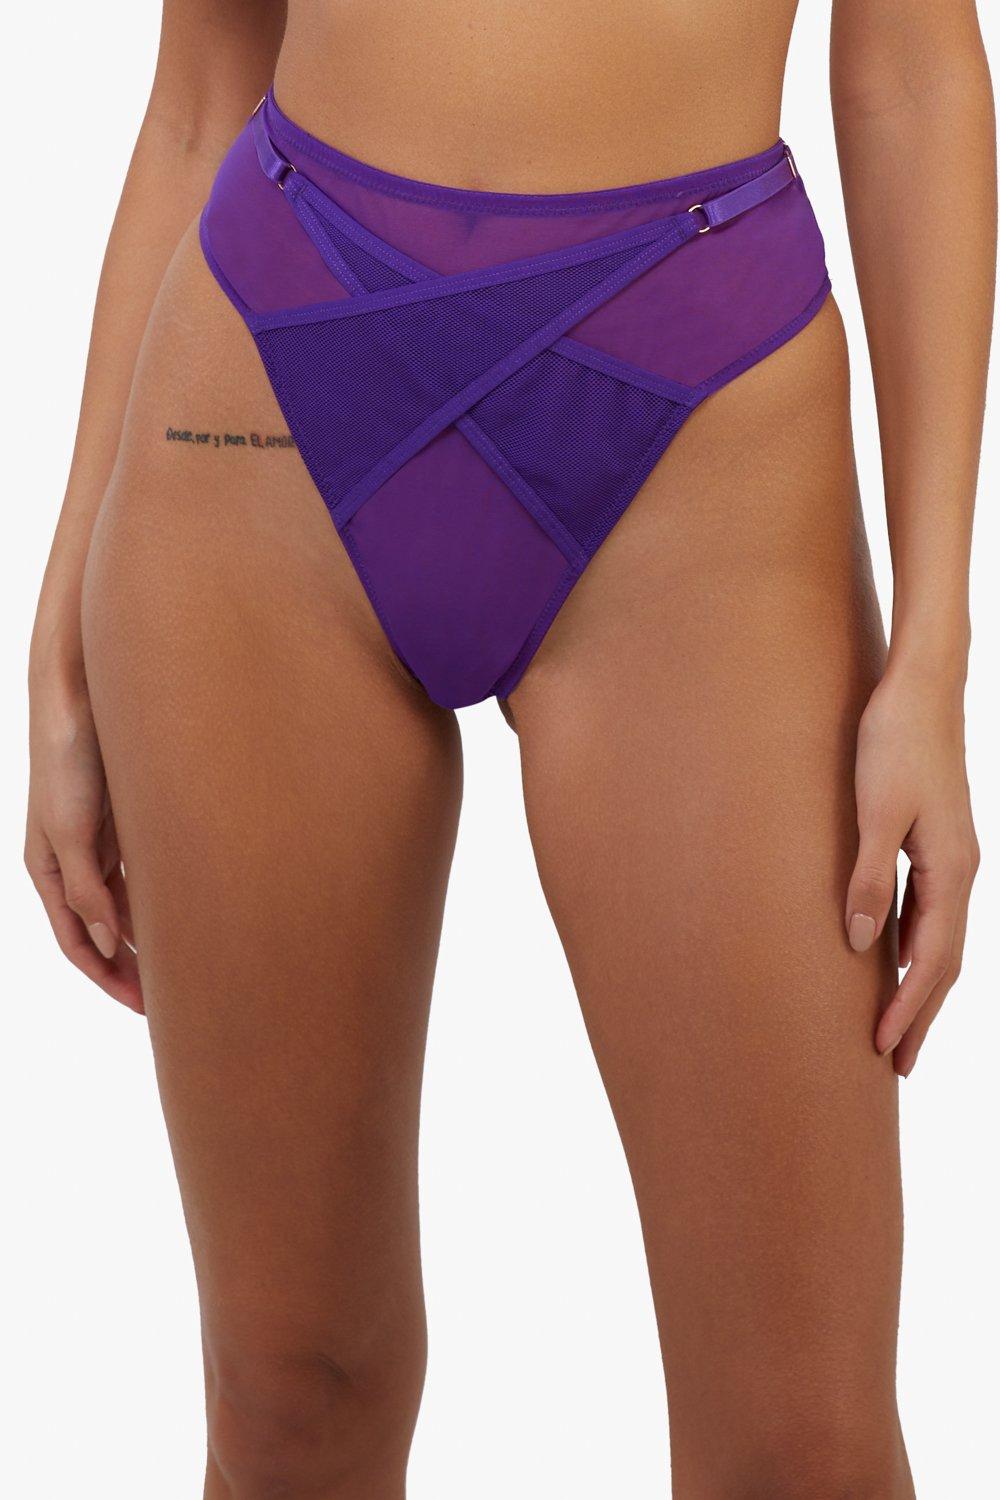 Buy OOLA LINGERIE Lace & Logo High Waist Light Control Brief 18-20, Knickers